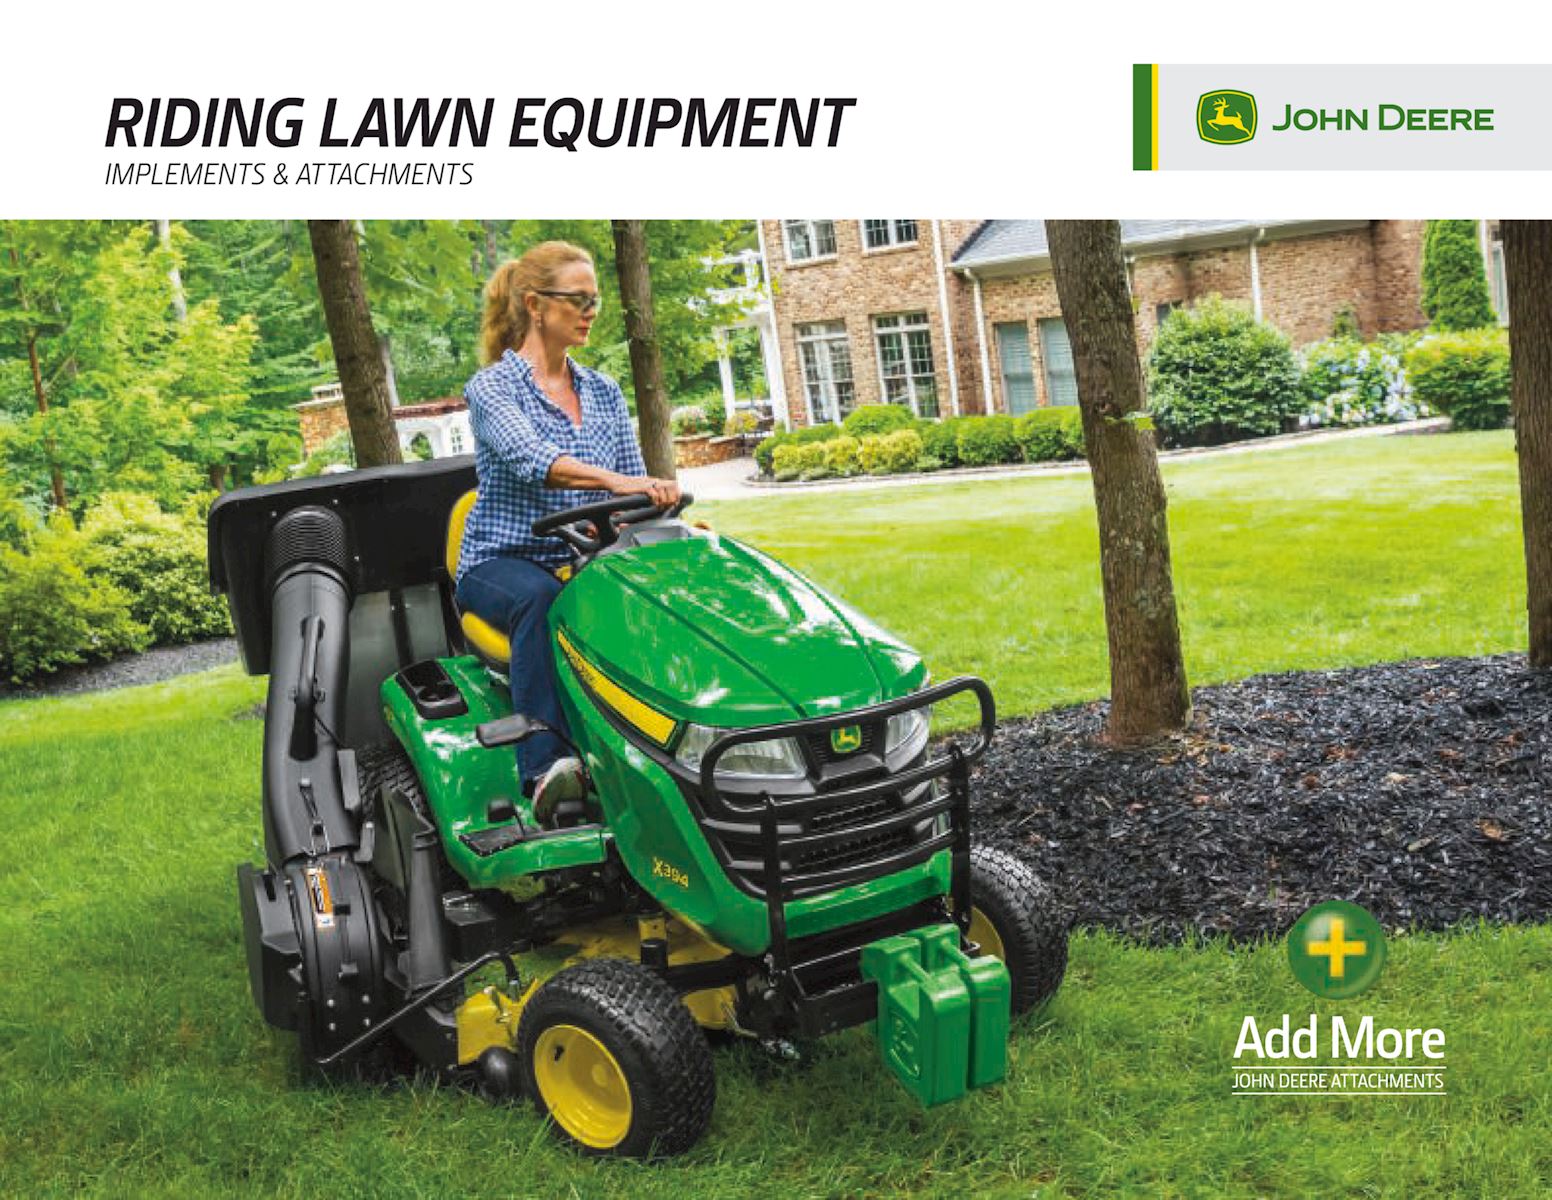 Riding Lawn Equipment Attachments, Accessories and Implements